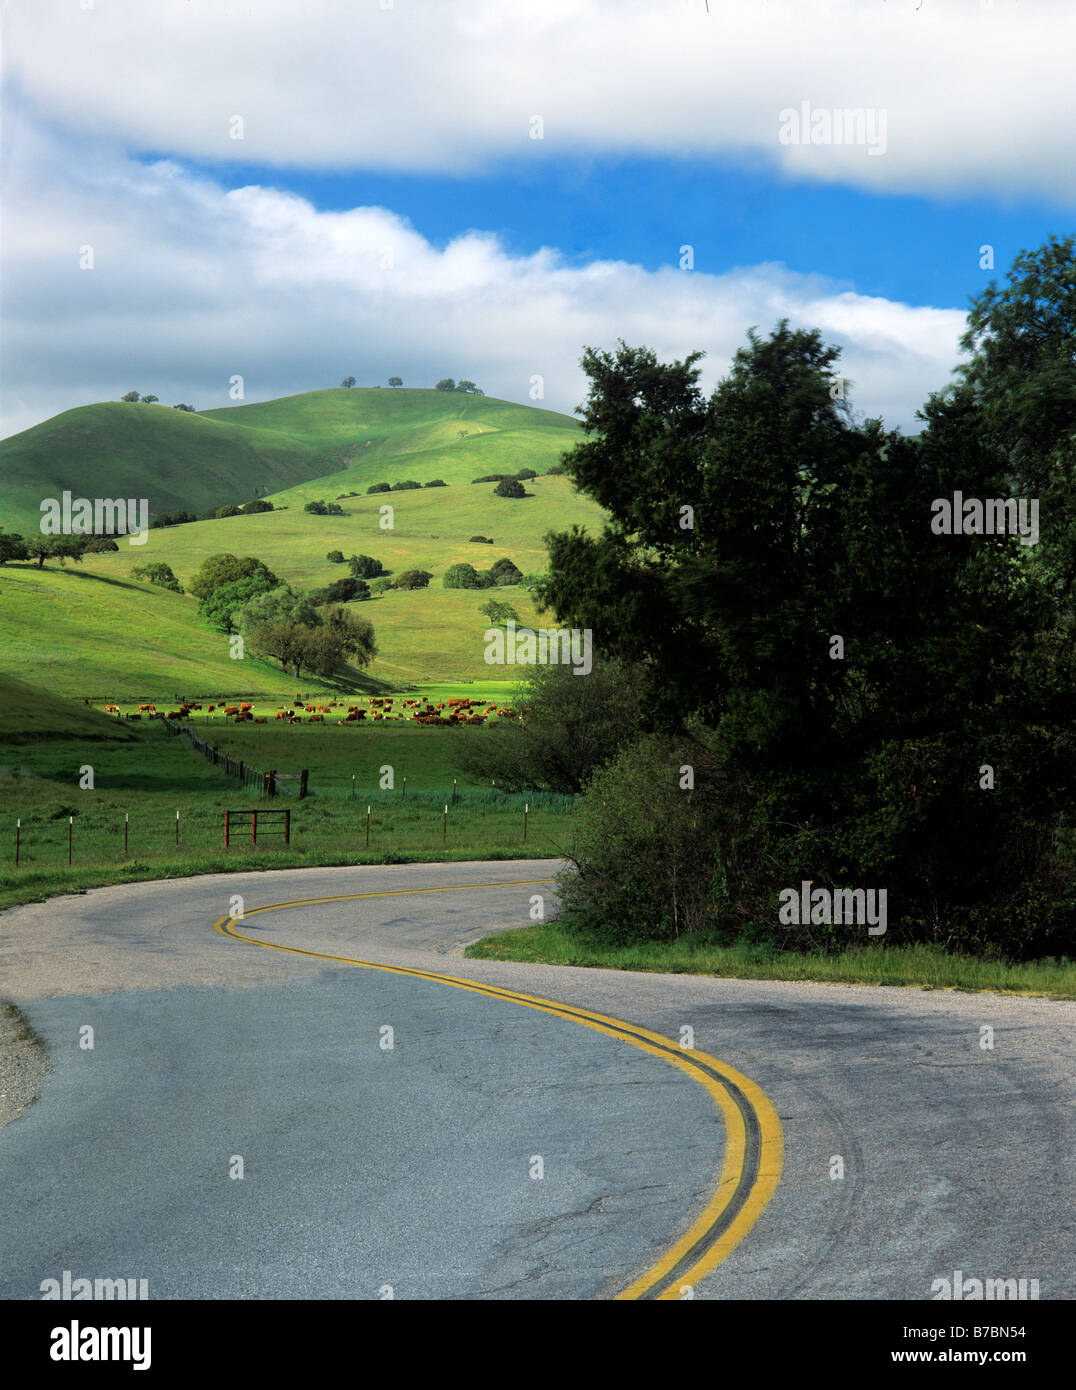 CARMEL VALLEY ROAD winds through the OAK STUDDED hills of CARMEL VALLLEYS CATTLE COUNTRY CALIFORNIA Stock Photo